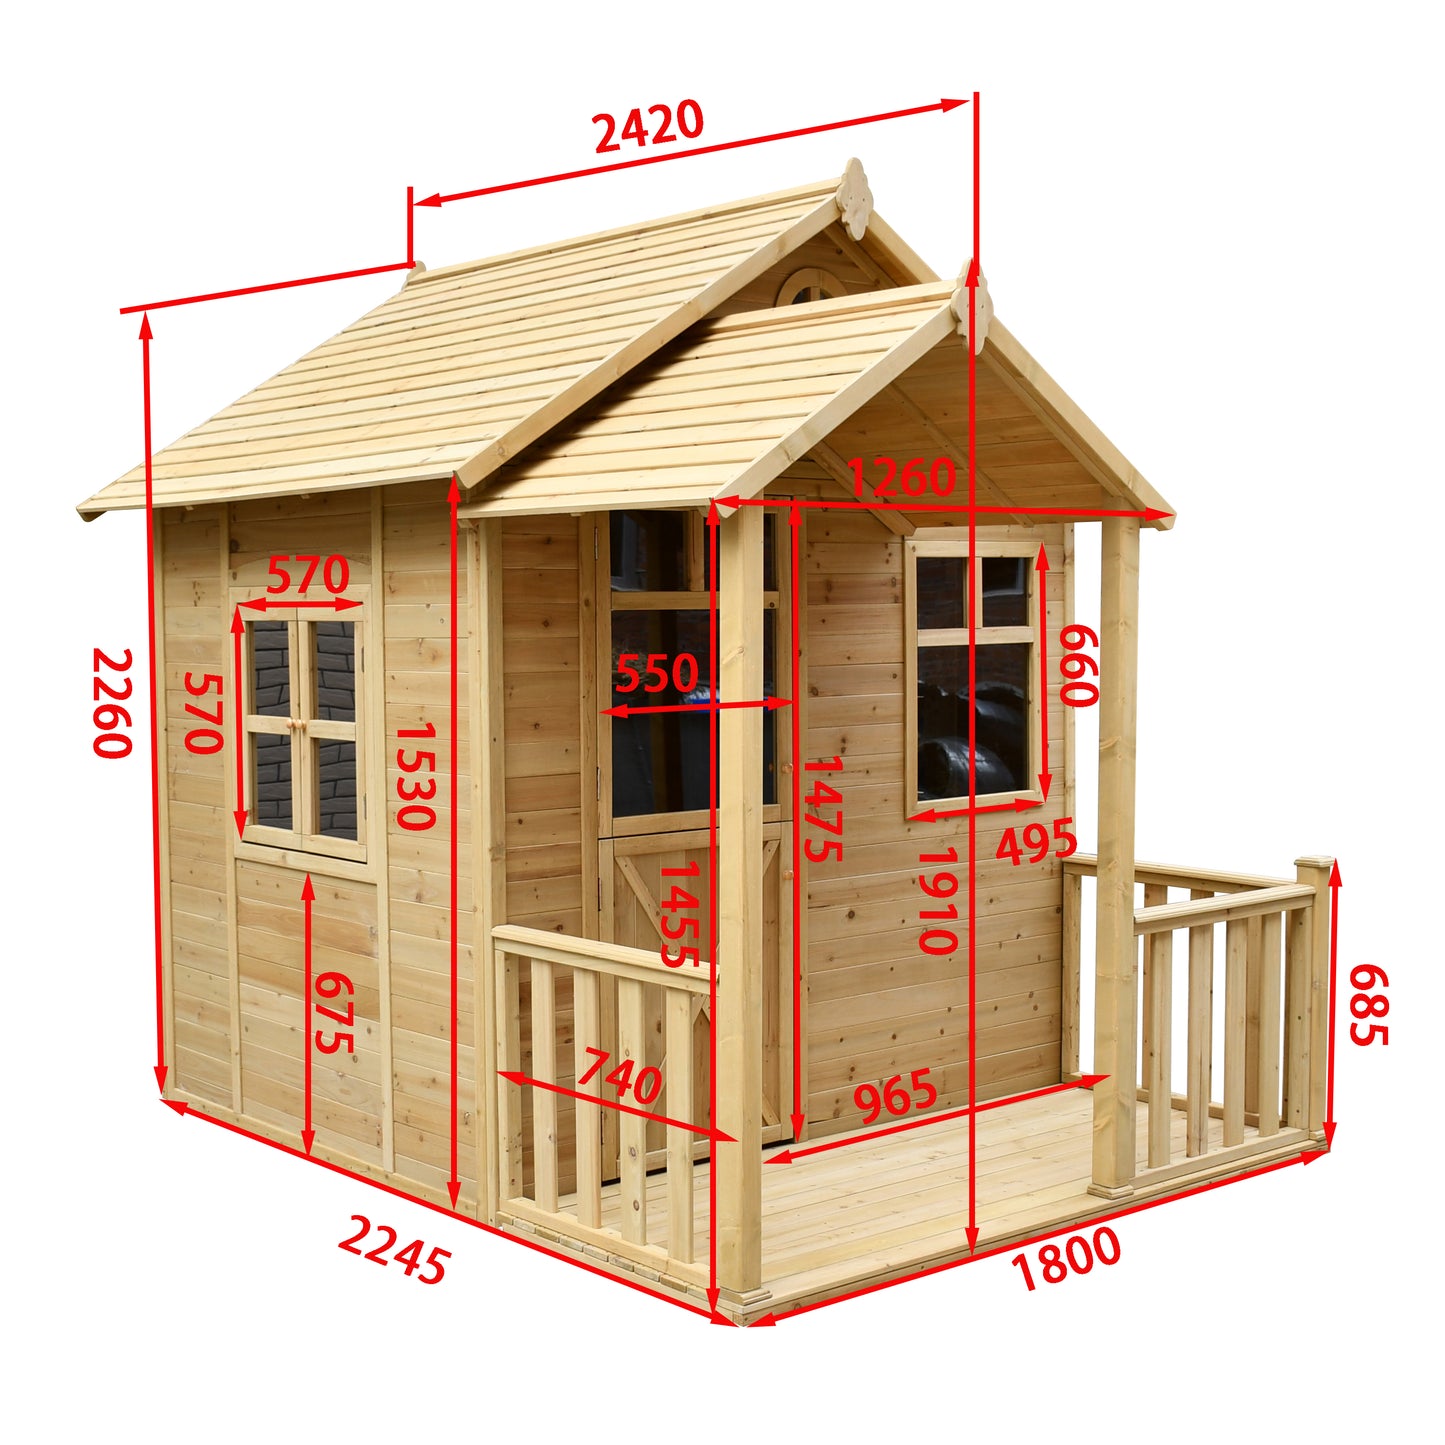 The Little Manor Cubby House